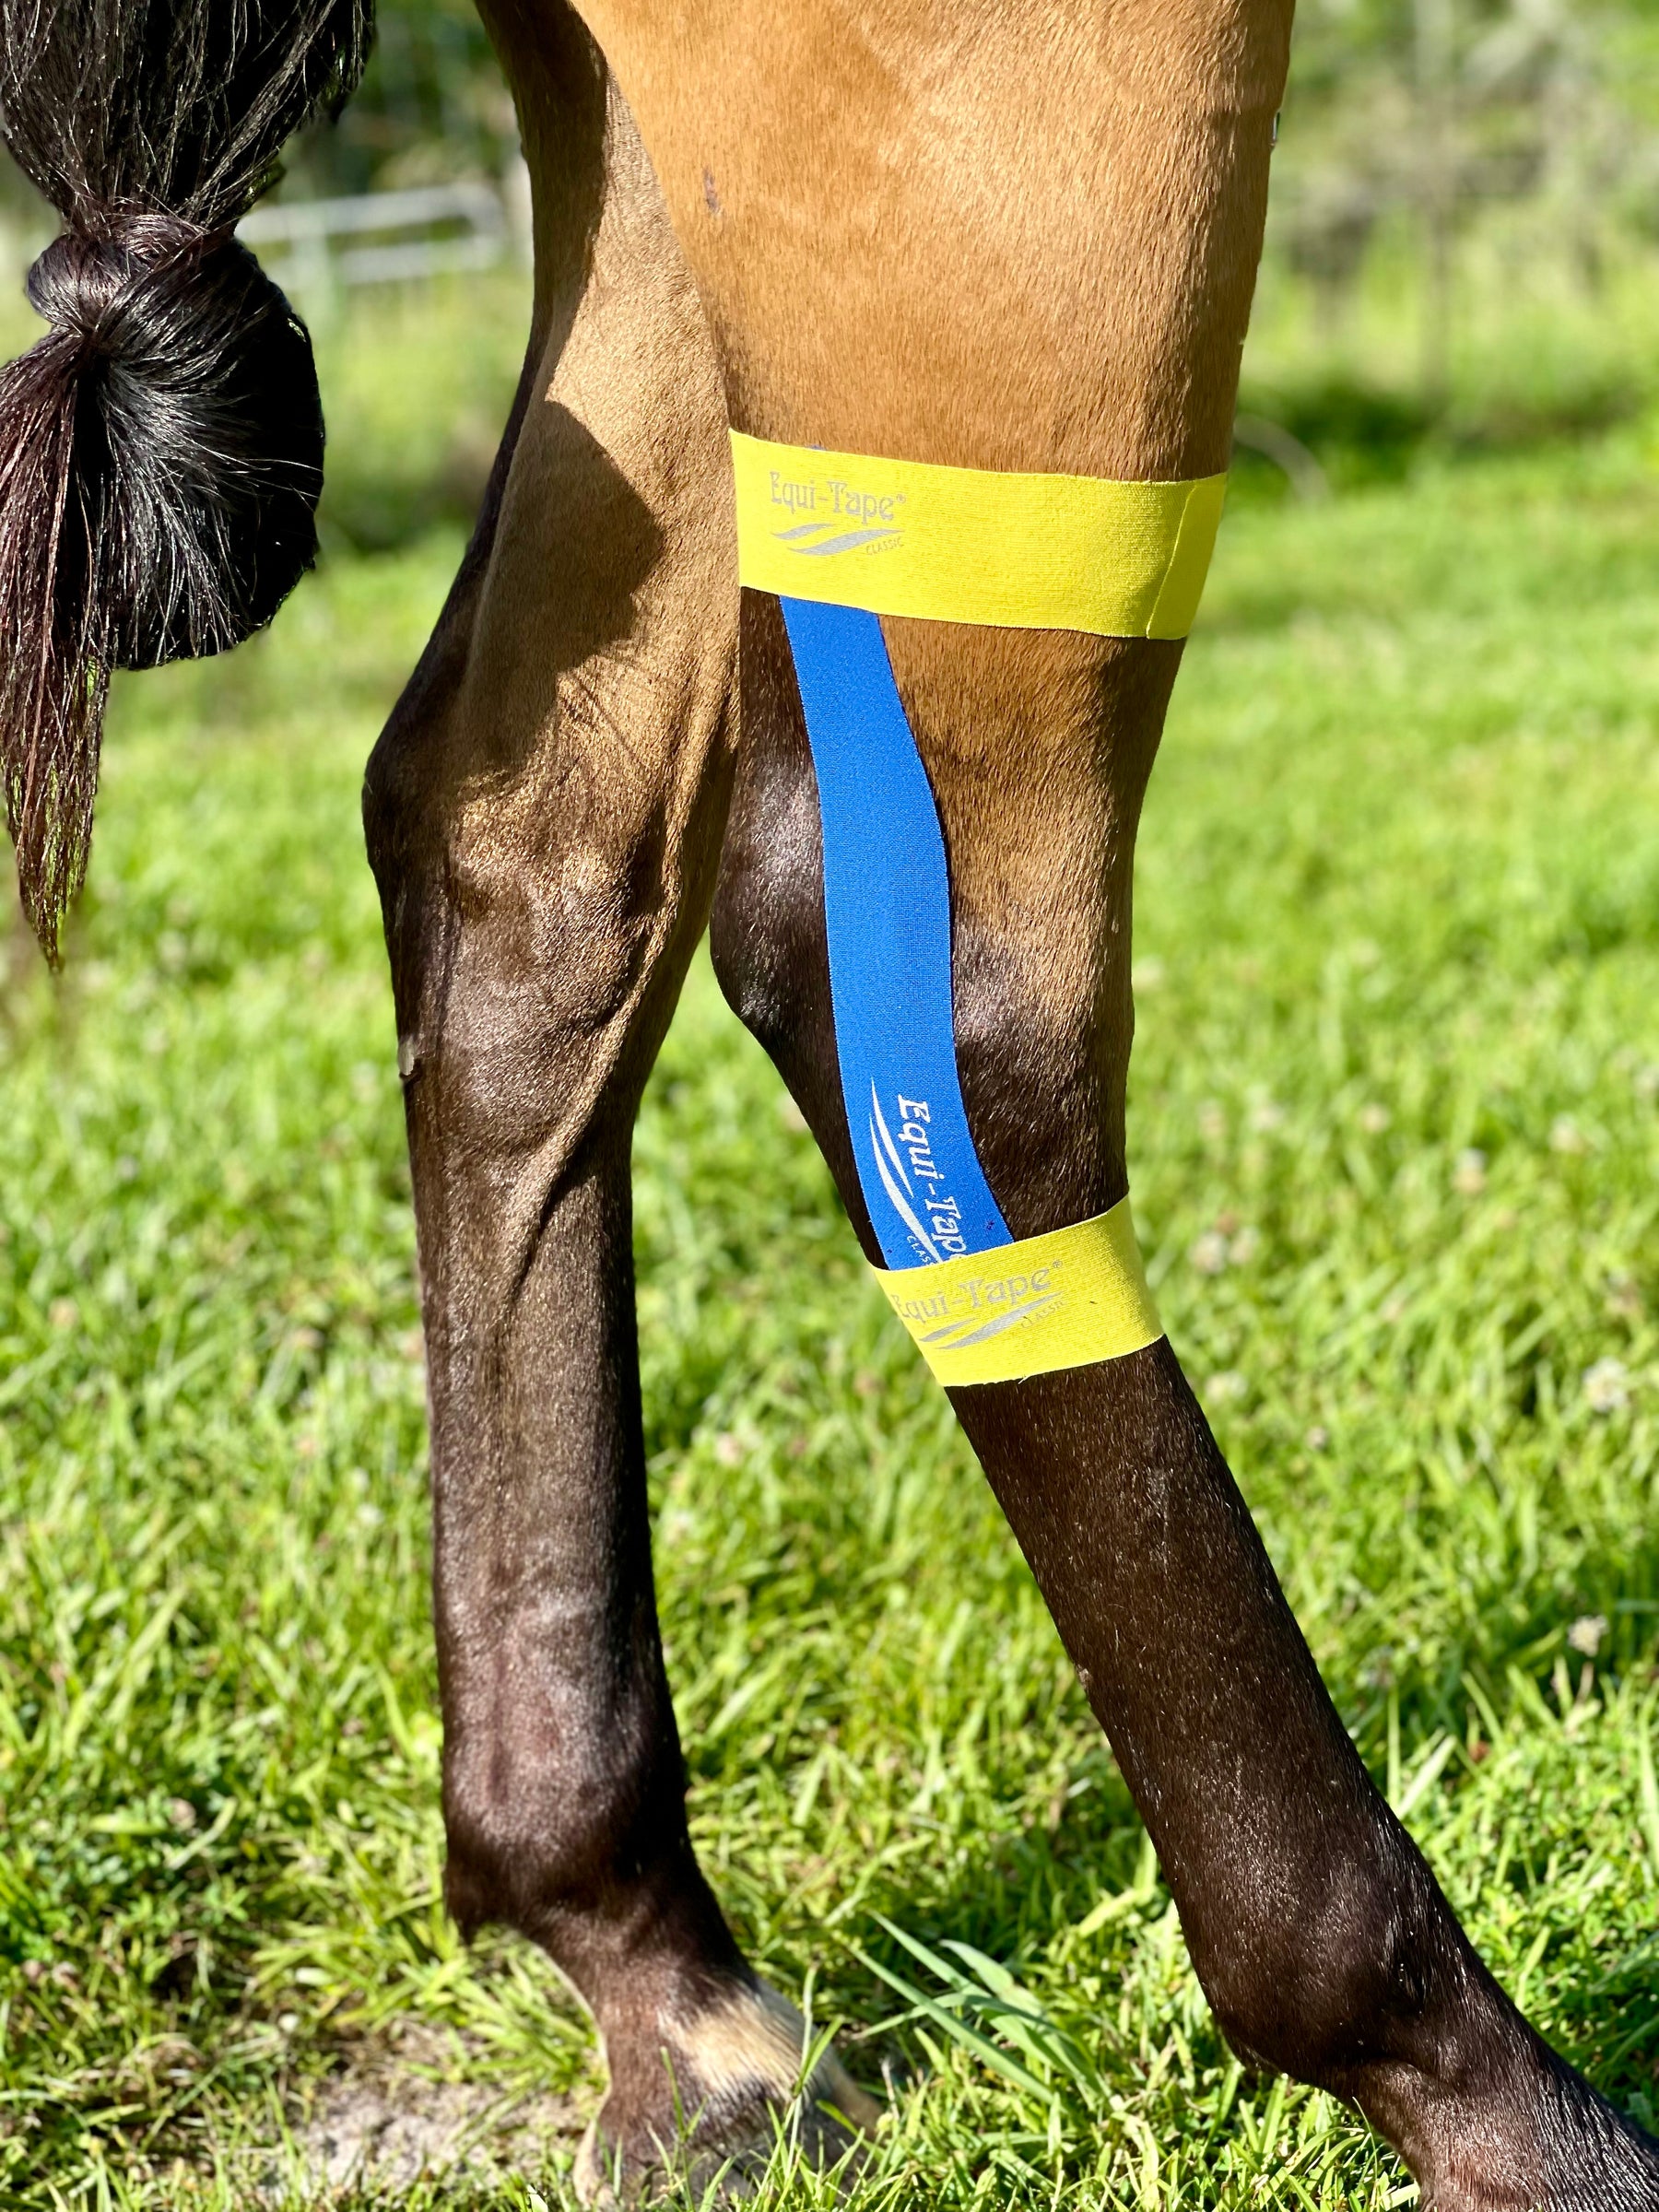 Why is the hock so important to a horse? What can you do to help prevent hock injuries or support a hock after it’s been injured?